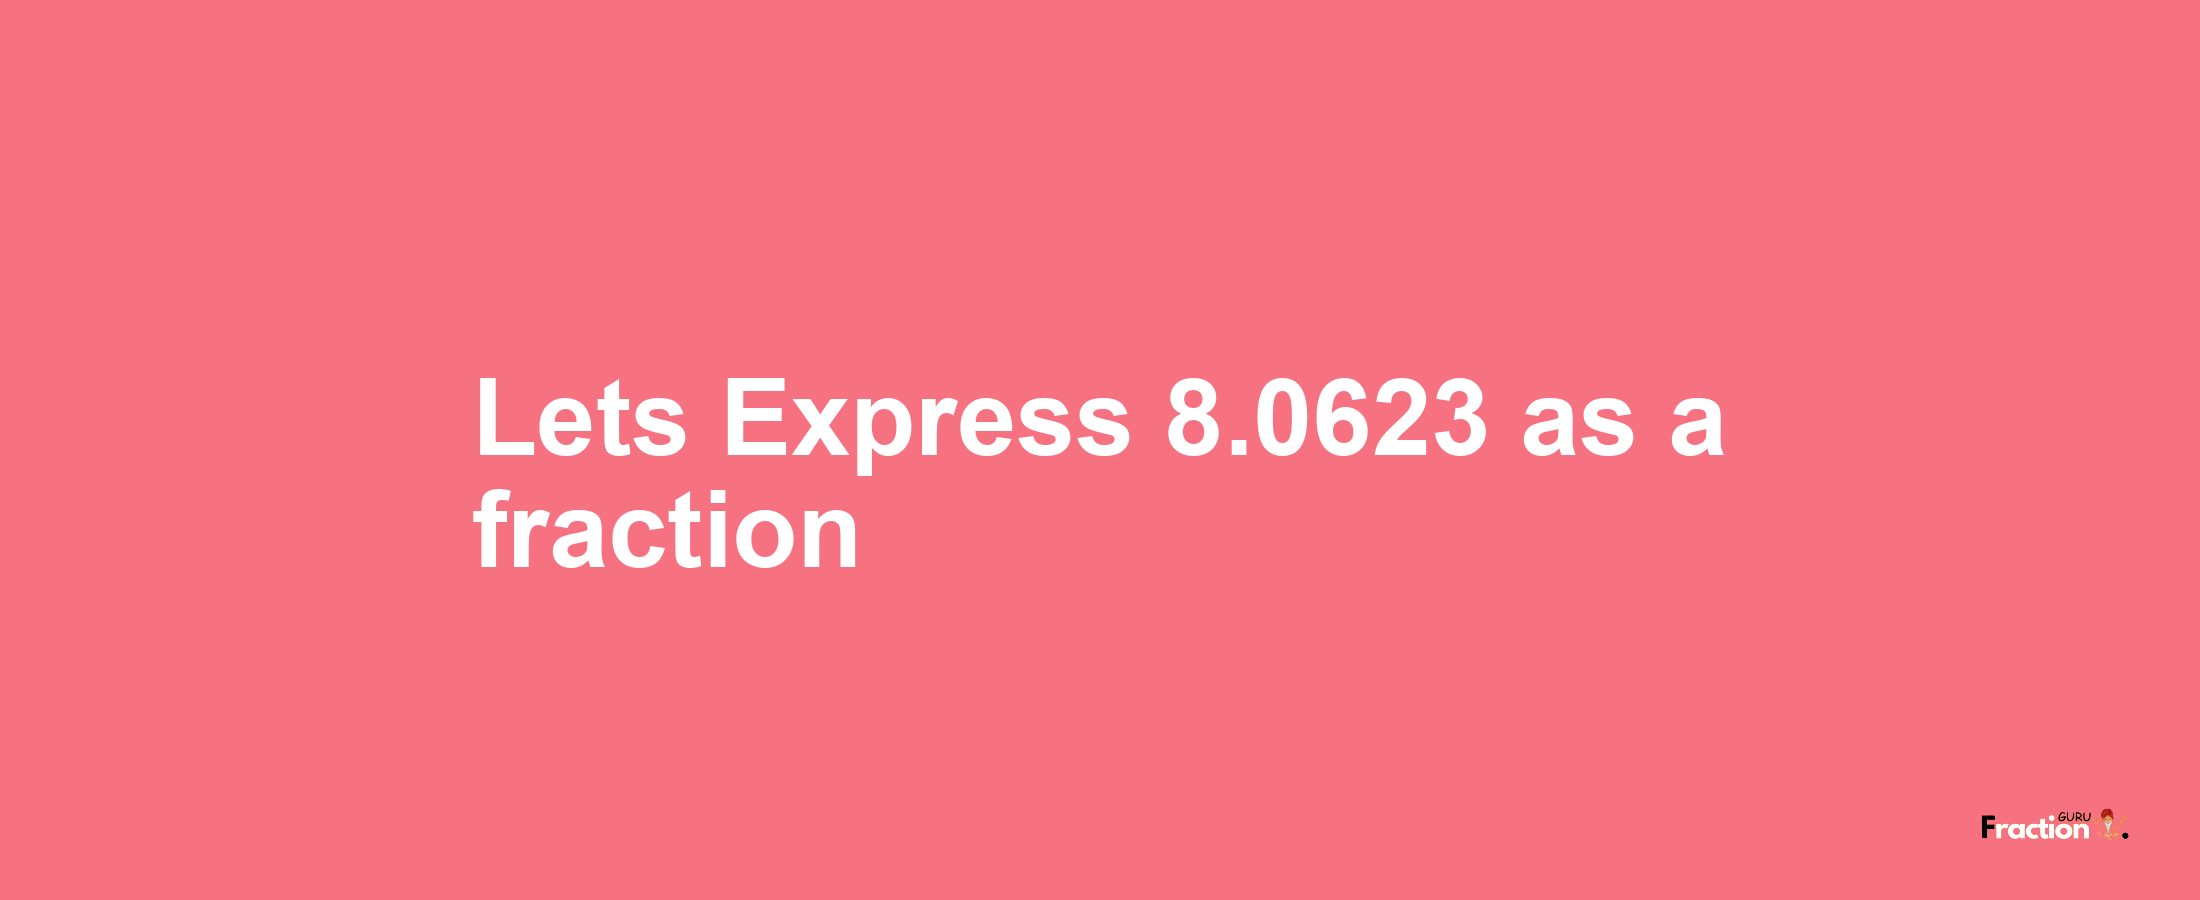 Lets Express 8.0623 as afraction